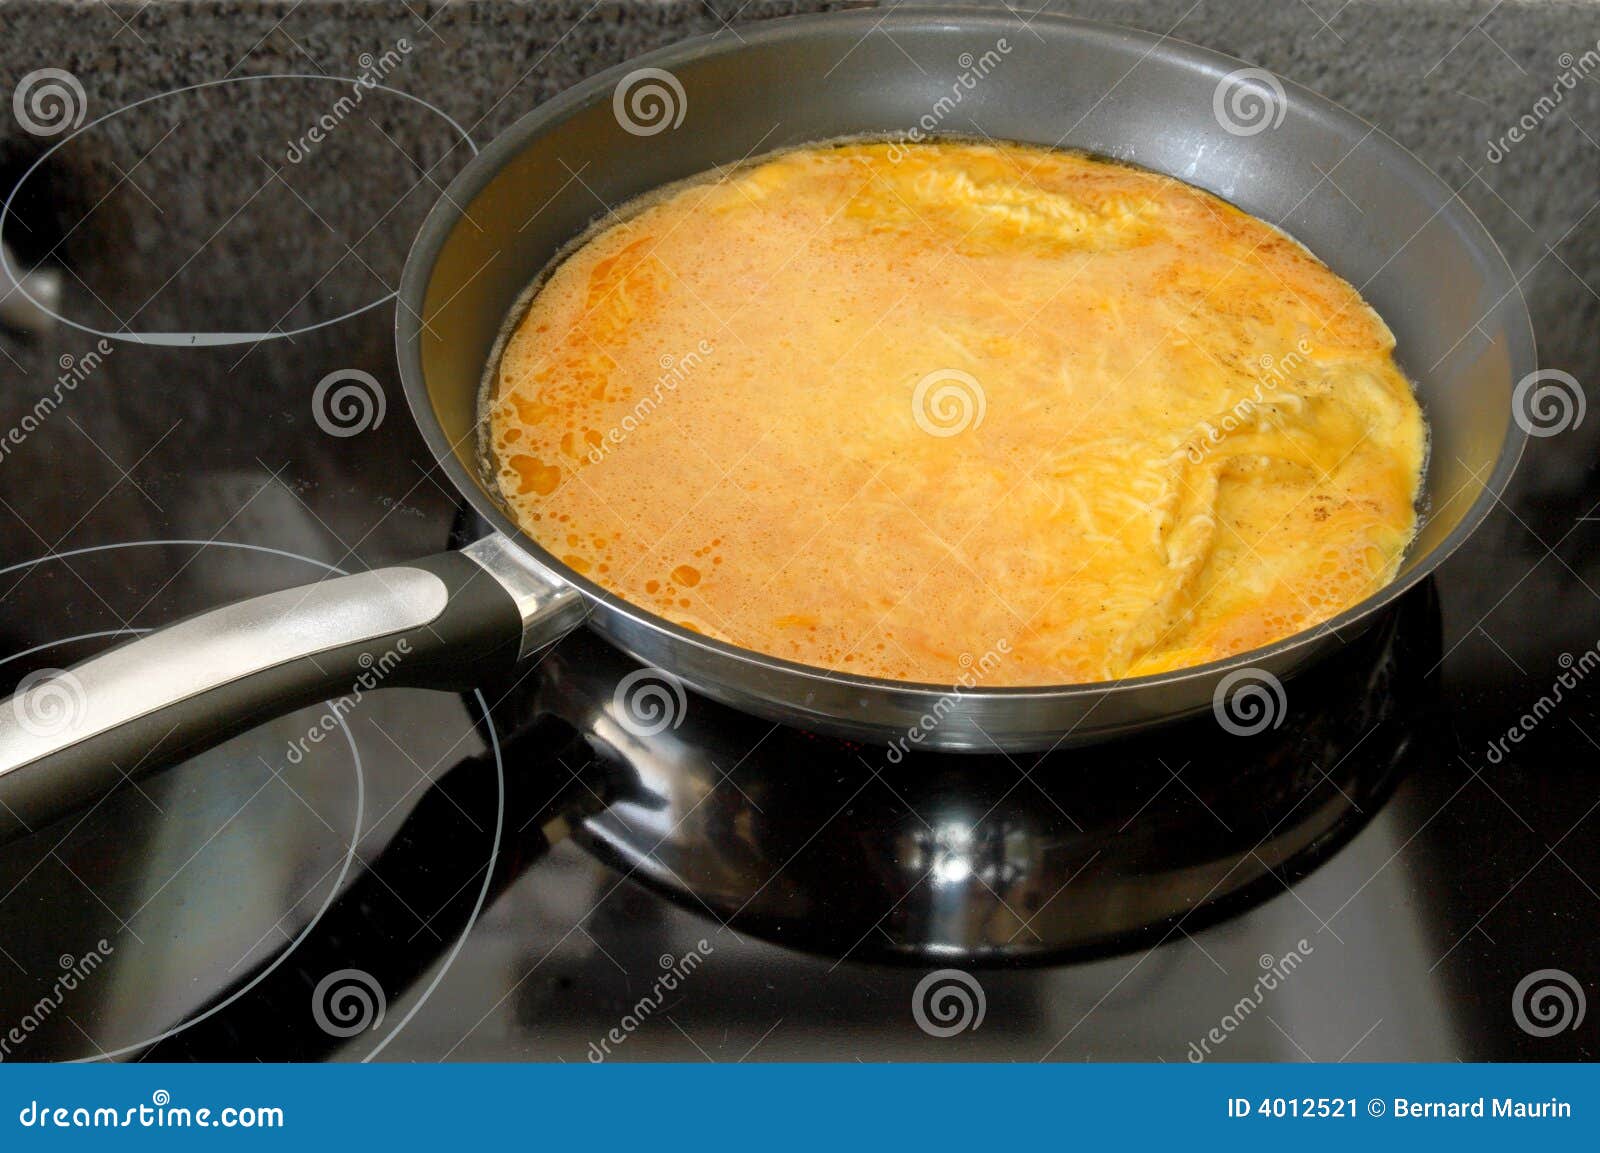 cooking a nice runny omelet